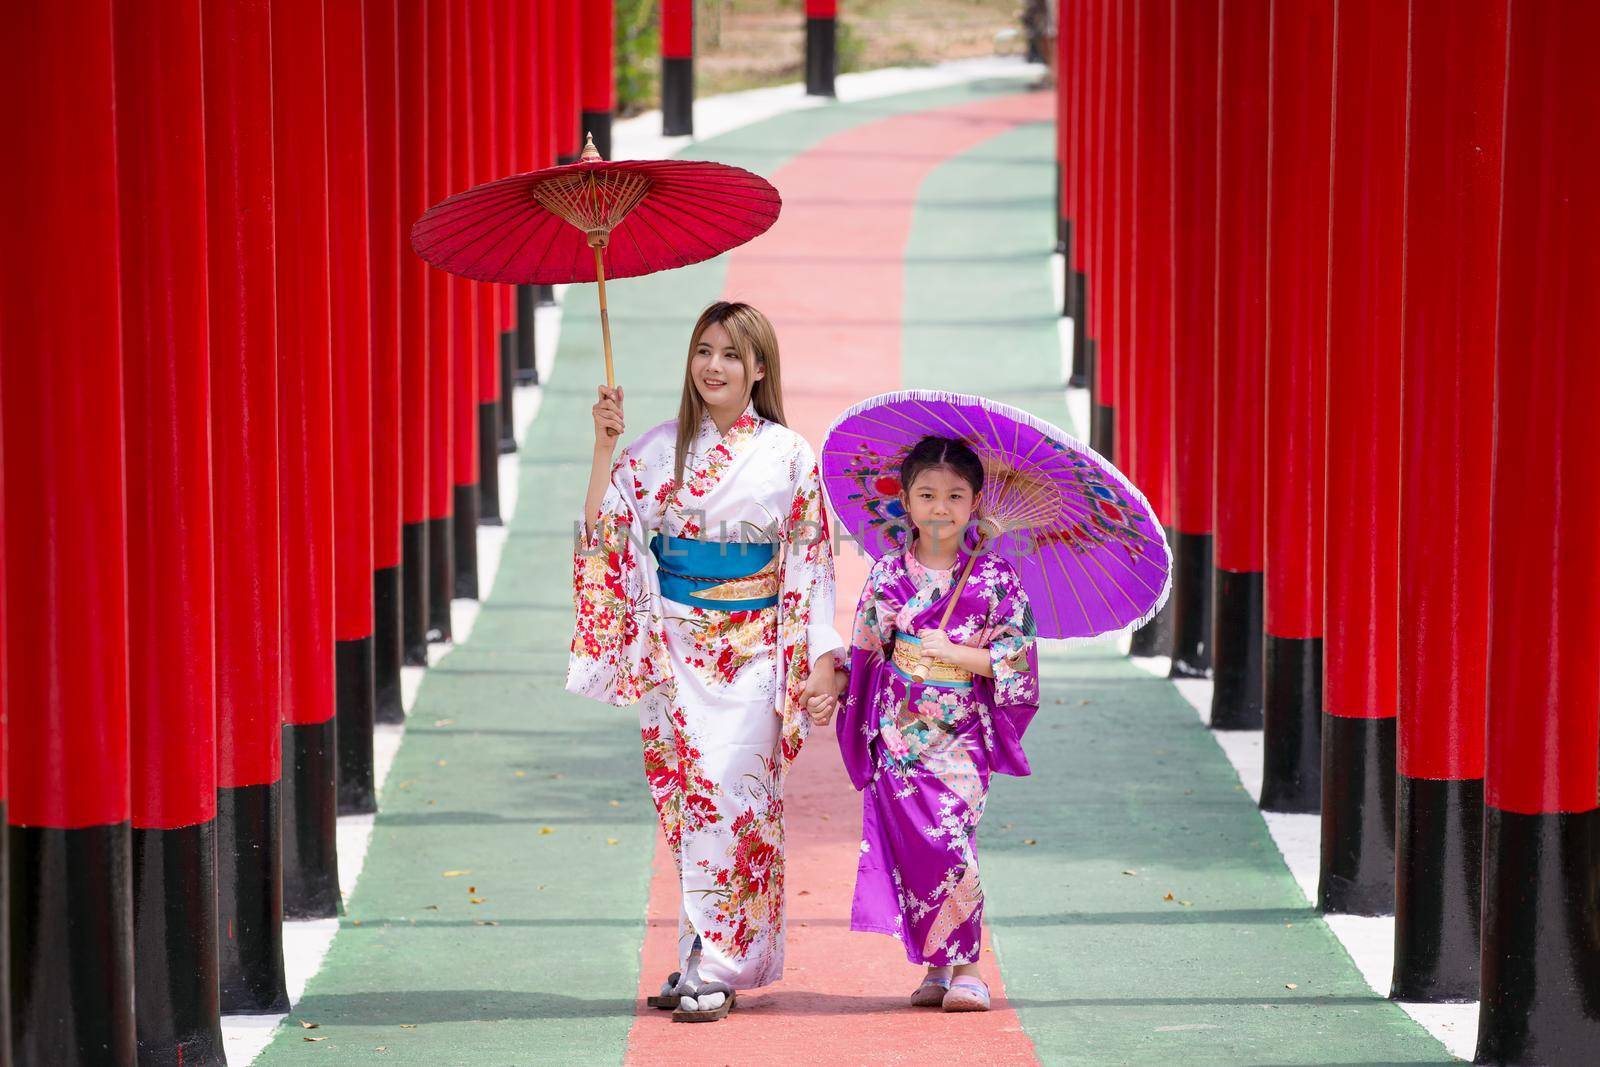  woman and little girl in kimono holding umbrella walking into at the shrine red gate, in Japanese garden. by chuanchai